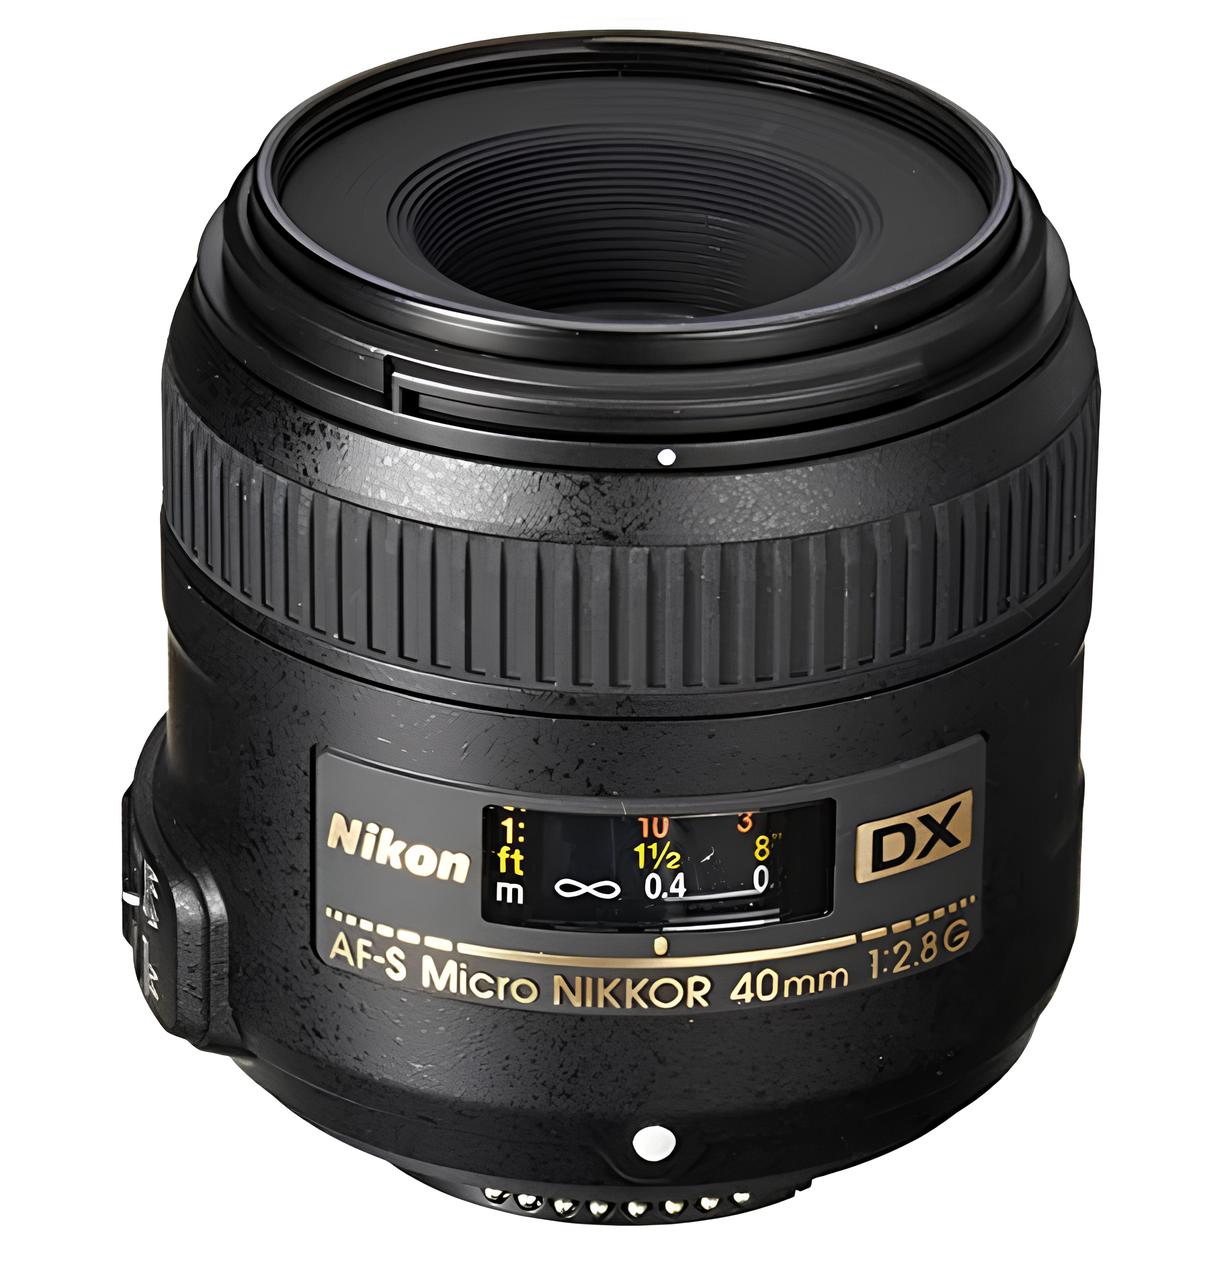 Nikon AF-S DX Micro-NIKKOR 40mm F/2.8G Fixed Zoom Lens with Auto Focus for Nikon DSLR Cameras - image 1 of 6